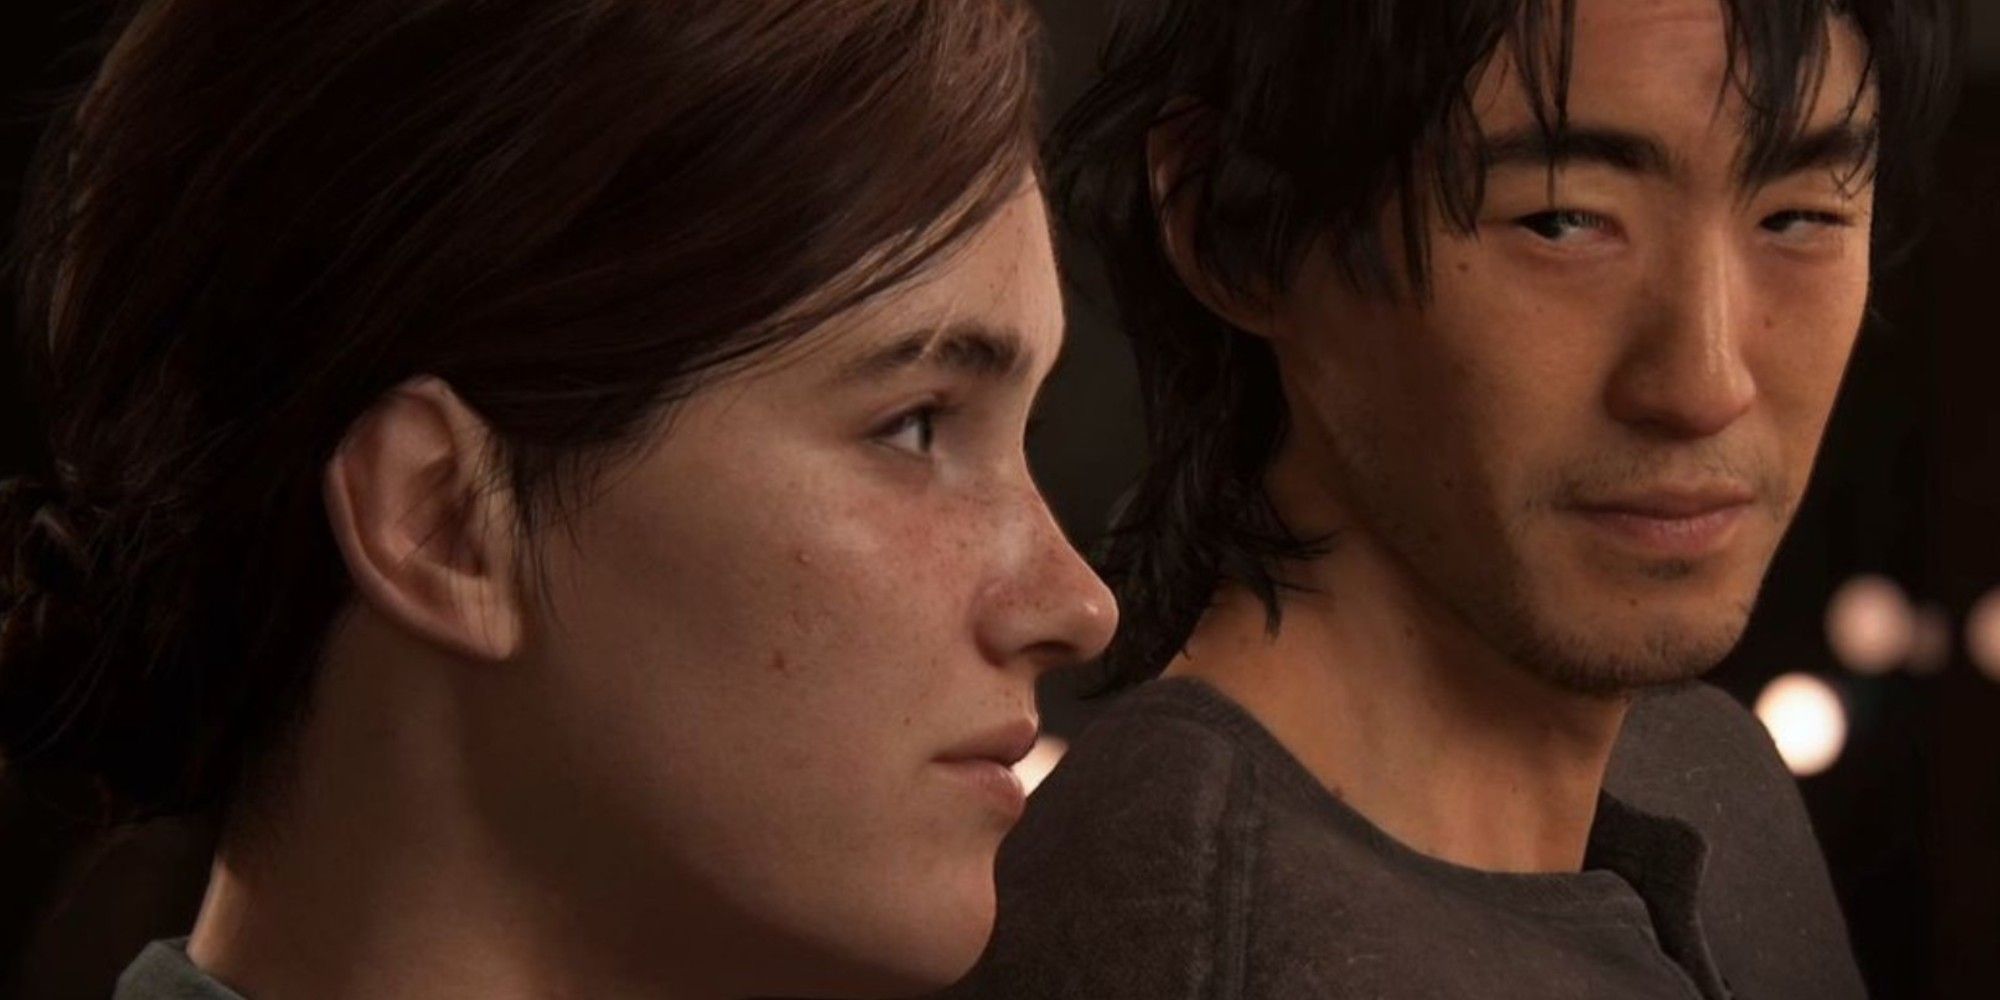 Ellie and Jesse in The Last of Us 2.